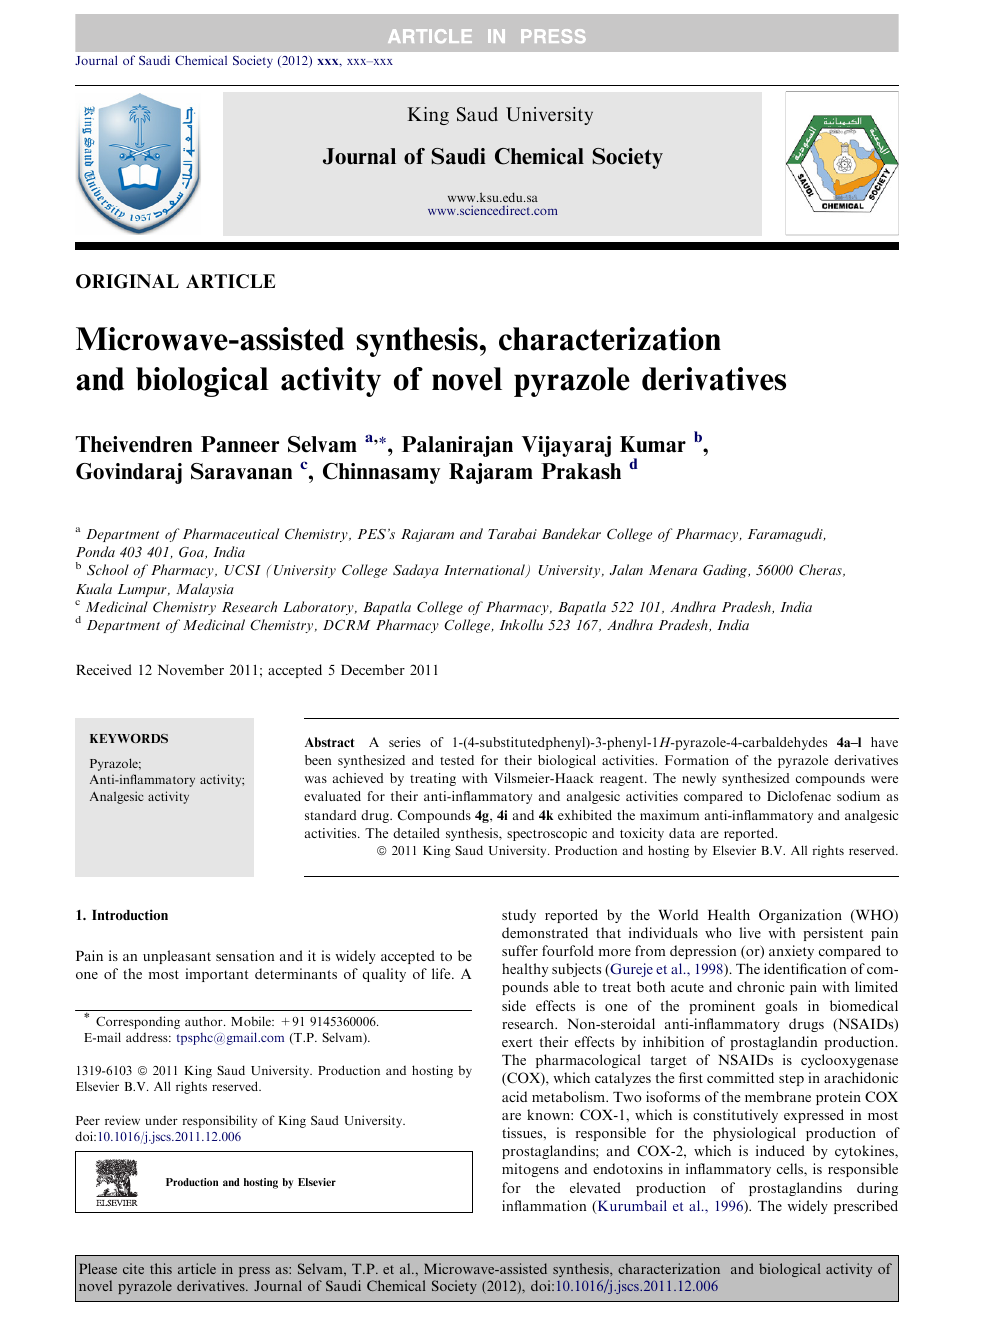 Microwave Assisted Synthesis Characterization And Biological Activity Of Novel Pyrazole Derivatives Topic Of Research Paper In Chemical Sciences Download Scholarly Article Pdf And Read For Free On Cyberleninka Open Science Hub